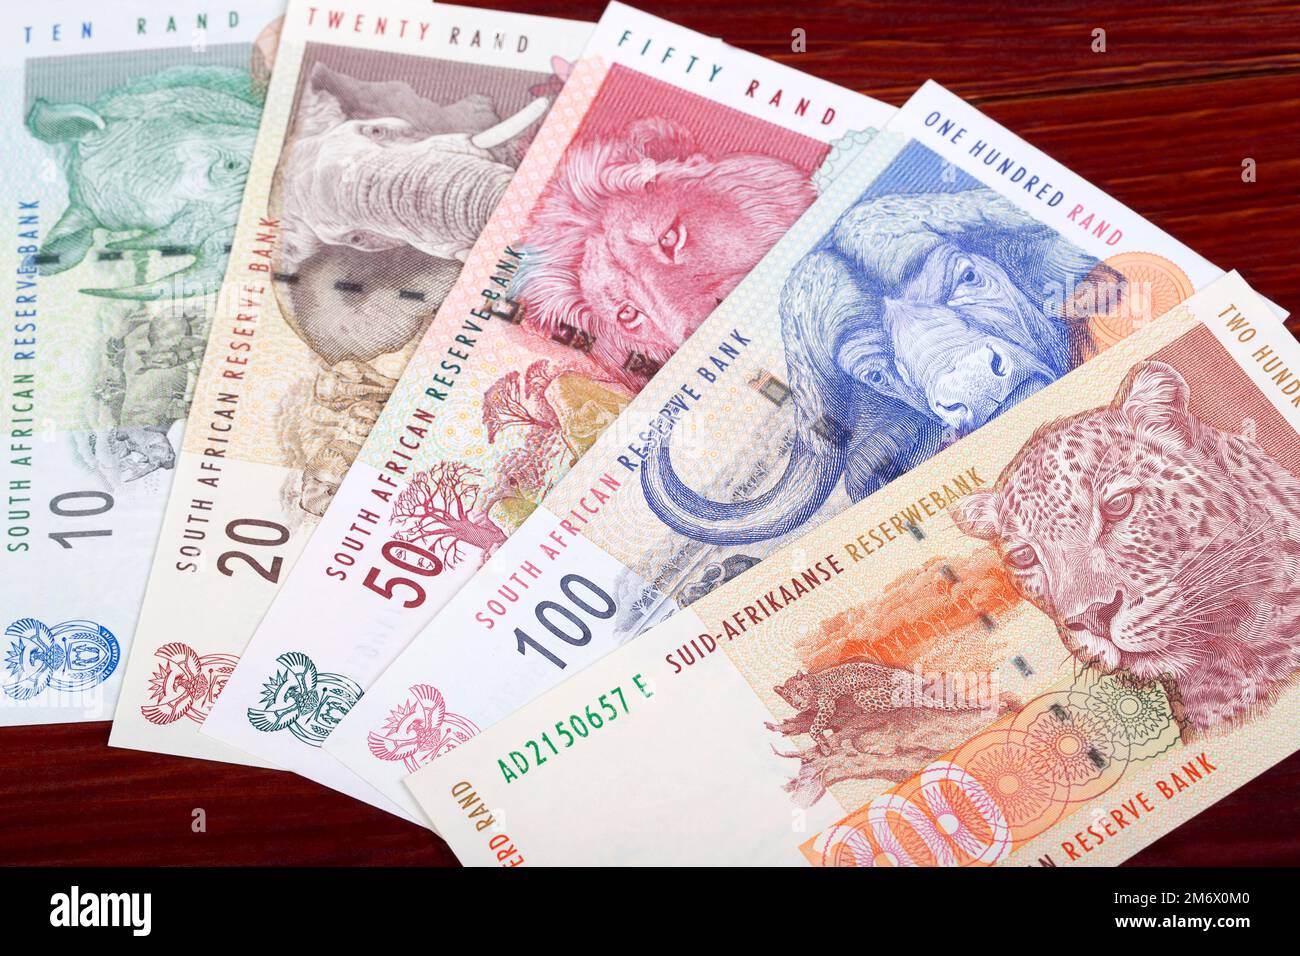 Old South African money - rand Stock Photo